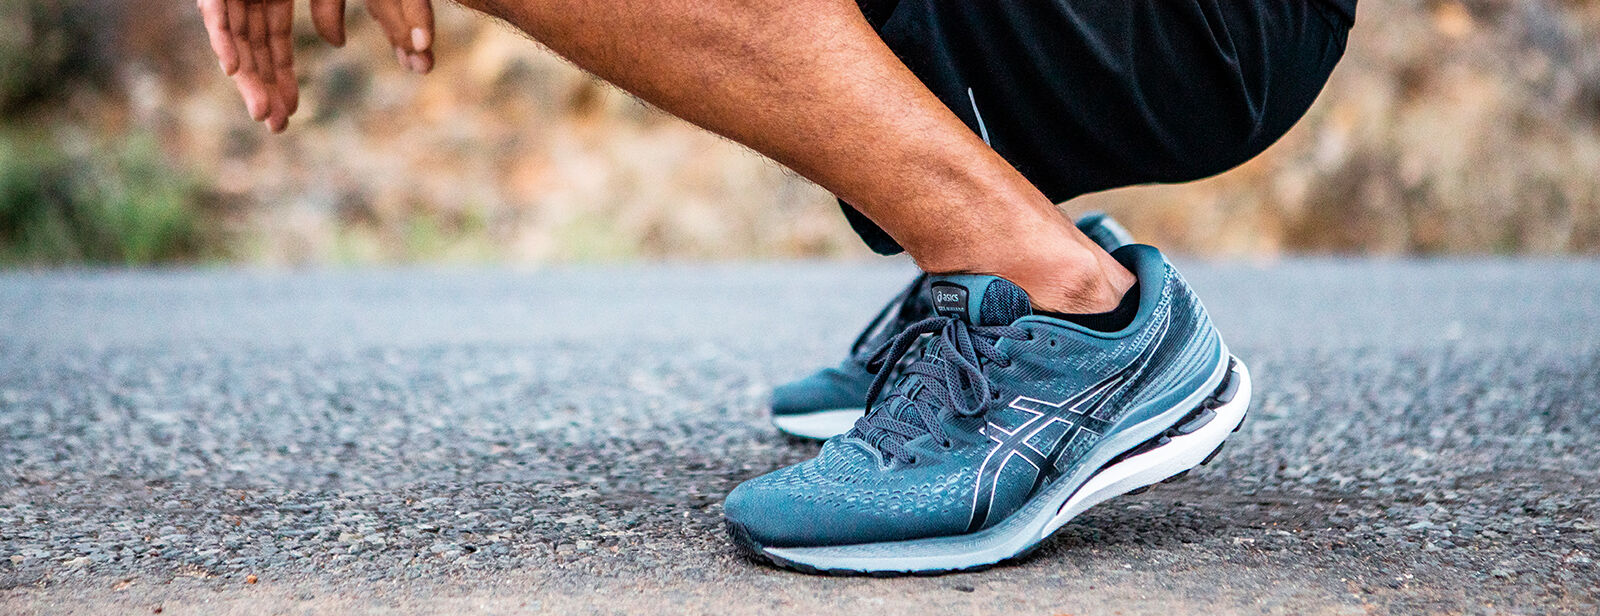 Which Asics Shoe Has The Best Arch Support?